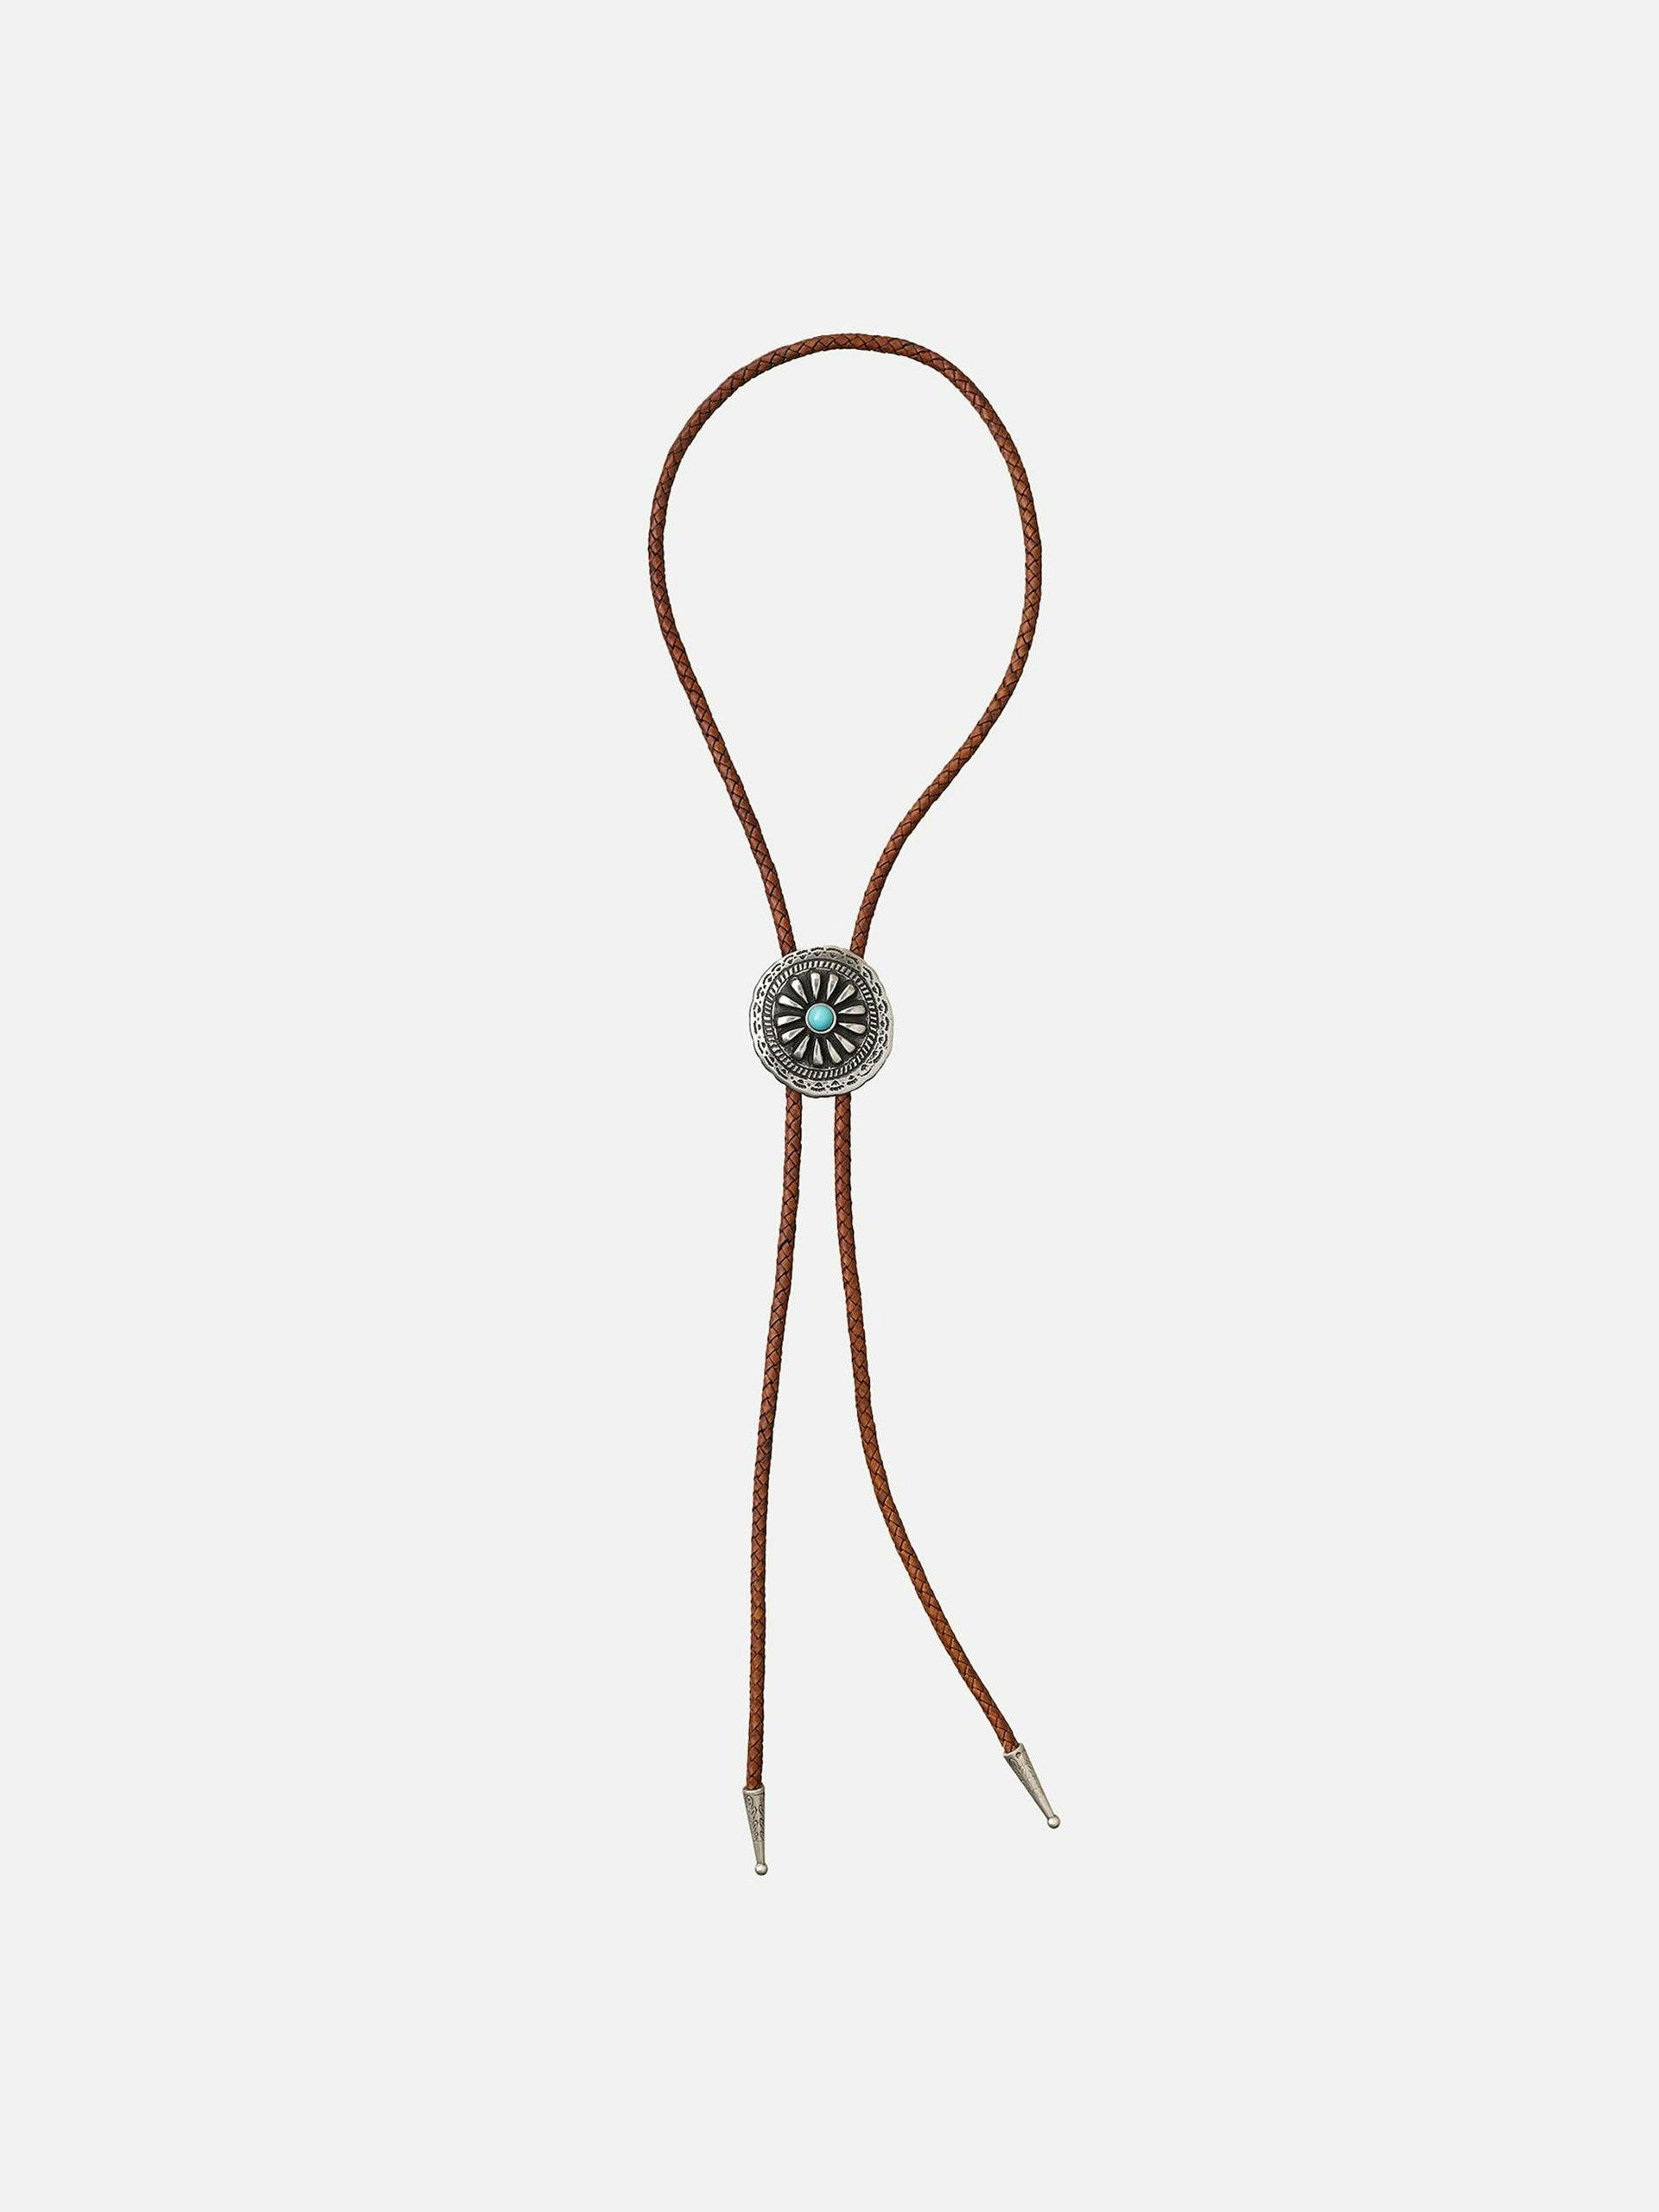 Turquoise and toffee brown bolo tie